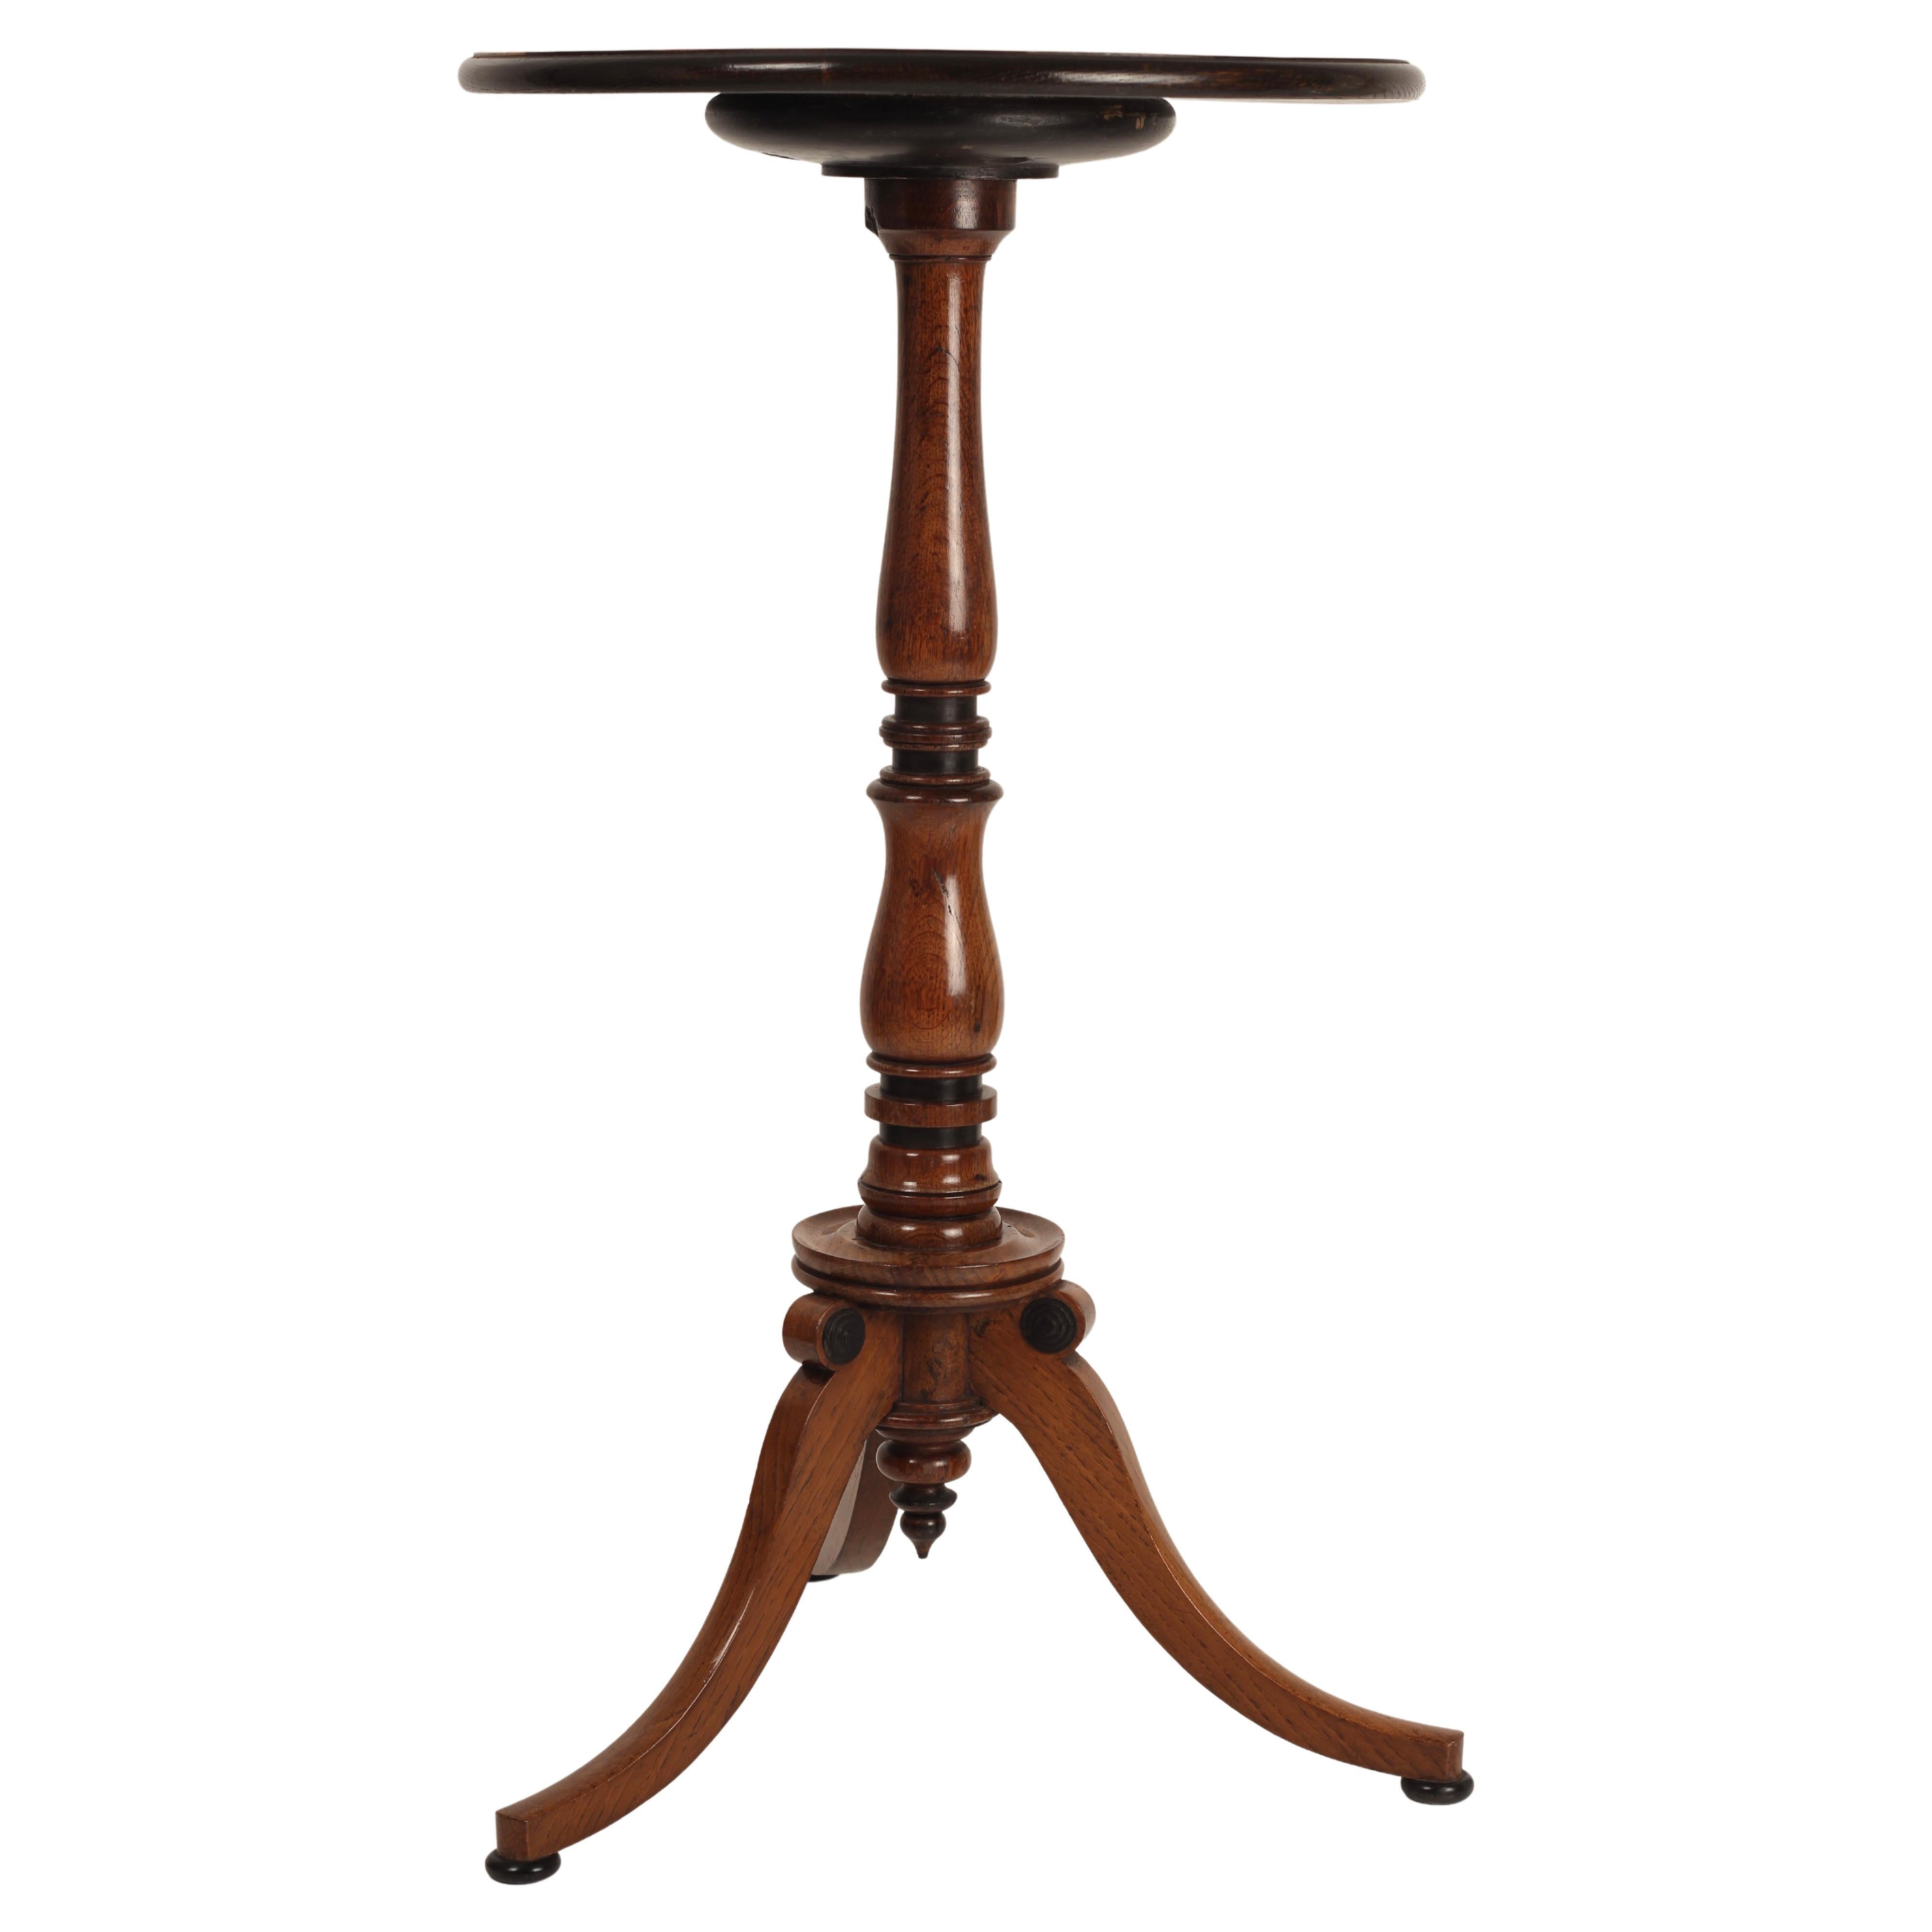 A fine Victorian 19th Century Oak and ebonised hardwood Specimen top pedestal or tripod table. Beautifully proportioned, with fine and delicate turning on the pedestal and leg details. A very good example with a rare and good condition specimen top.